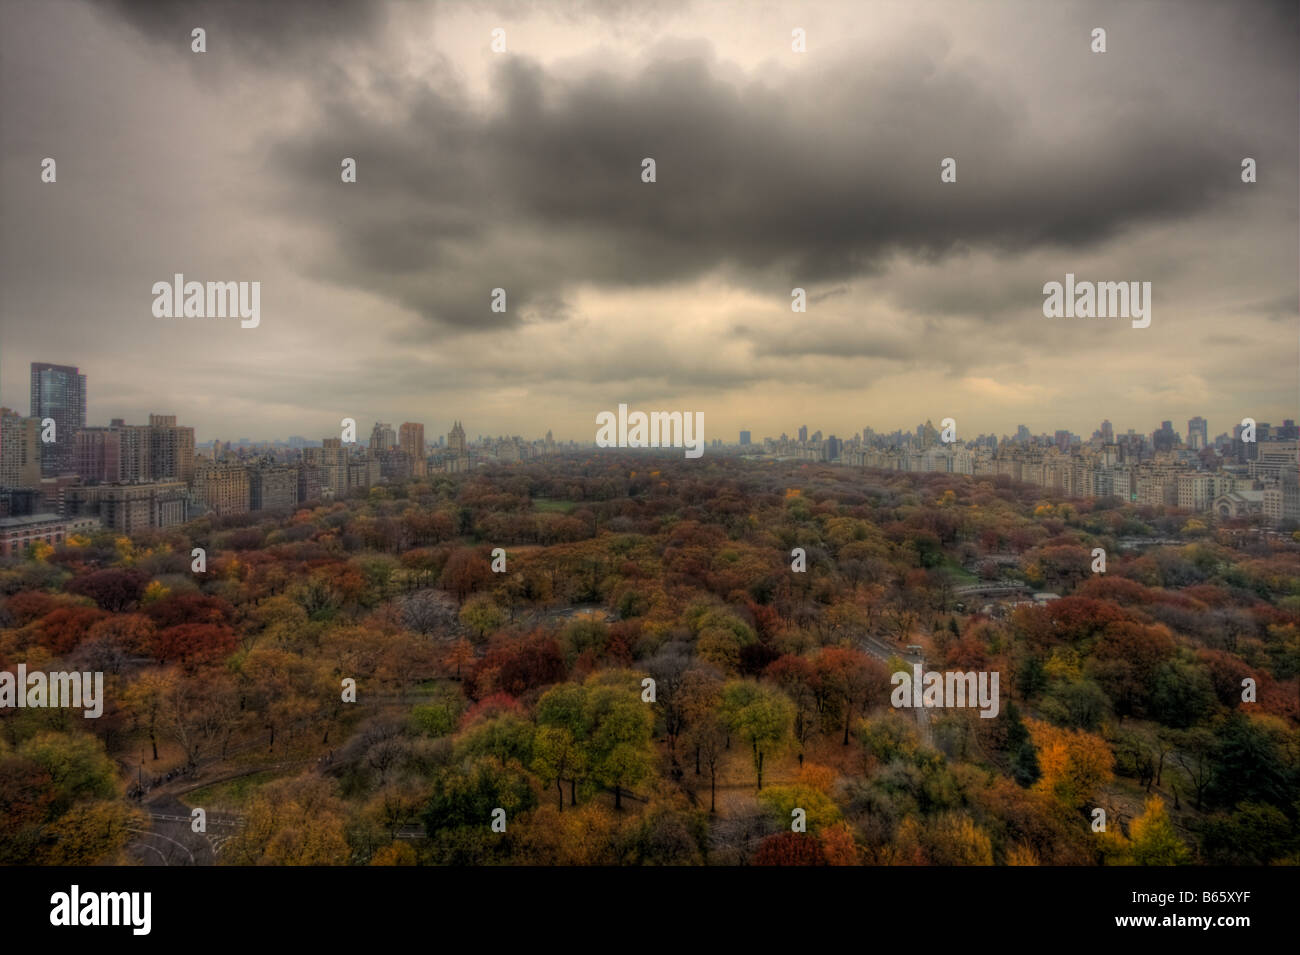 High Dynamic Range image of Central Park. Taken from the 27th floor of the Essex House Hotel in New York City. Stock Photo